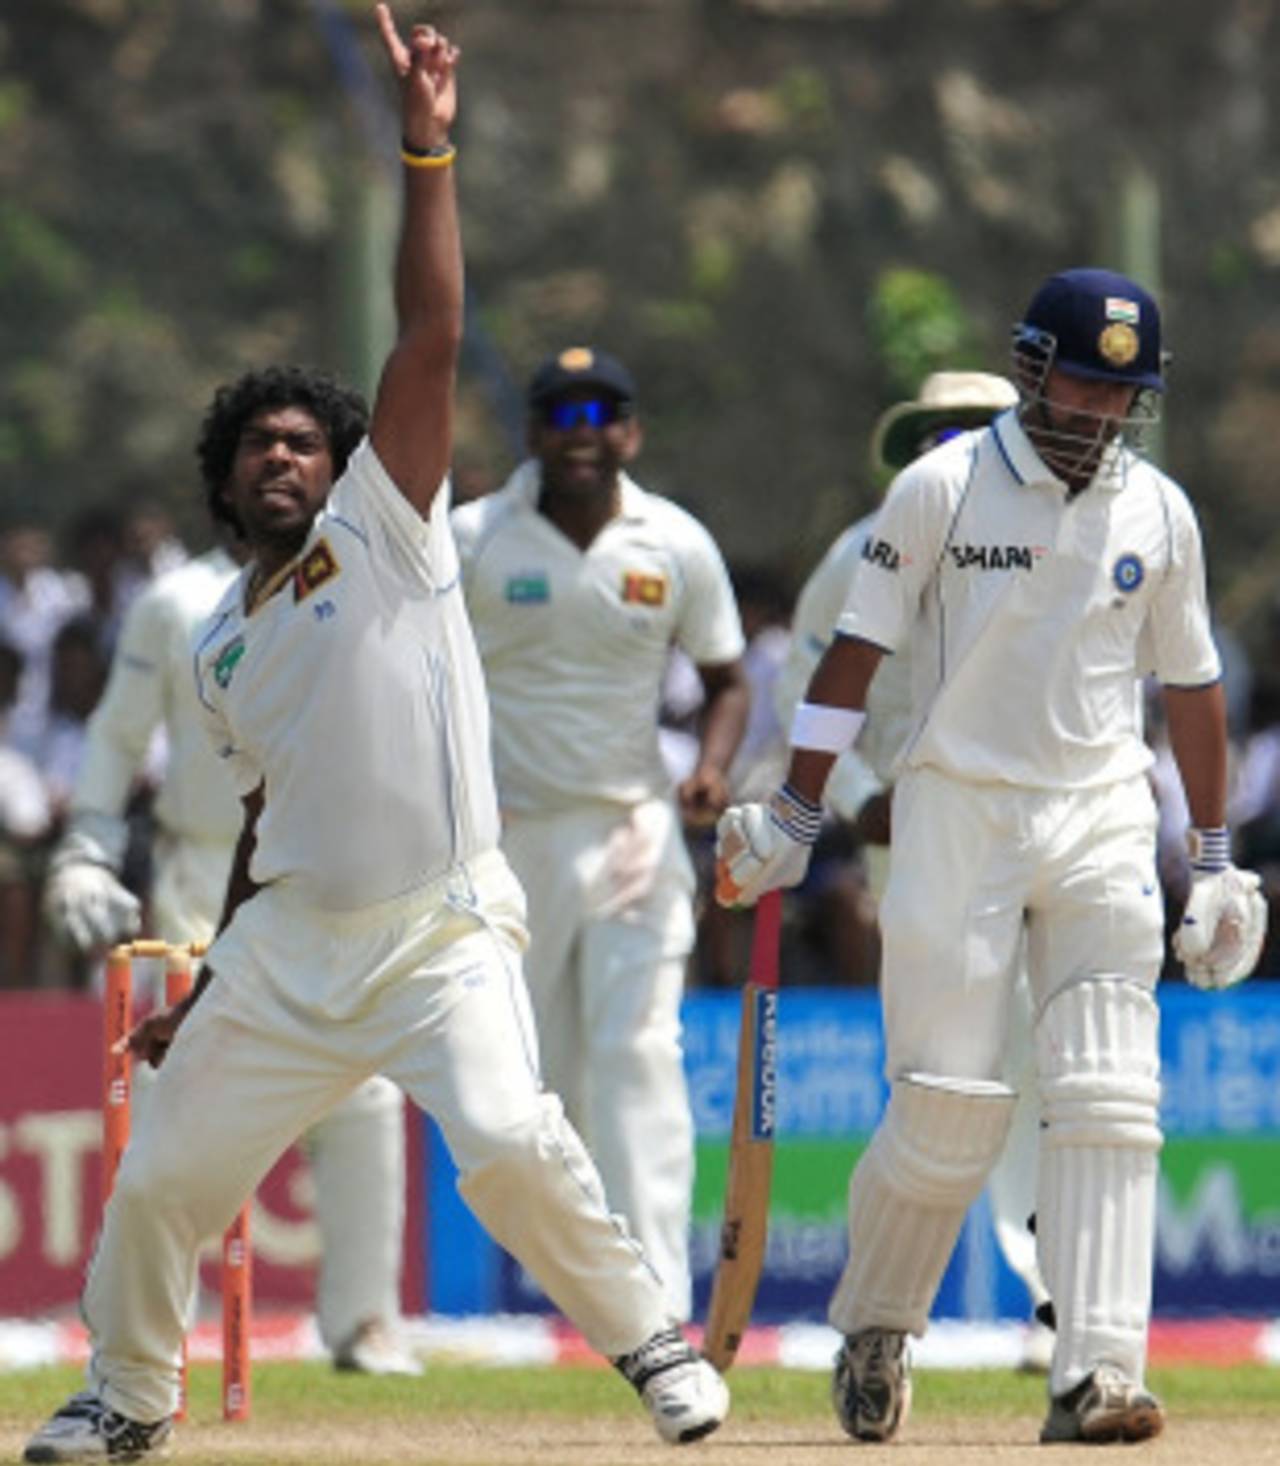 Kumar Sangakkara backs his fast bowlers 100% despite the possibility of injuries, and expectes the same from them&nbsp;&nbsp;&bull;&nbsp;&nbsp;AFP